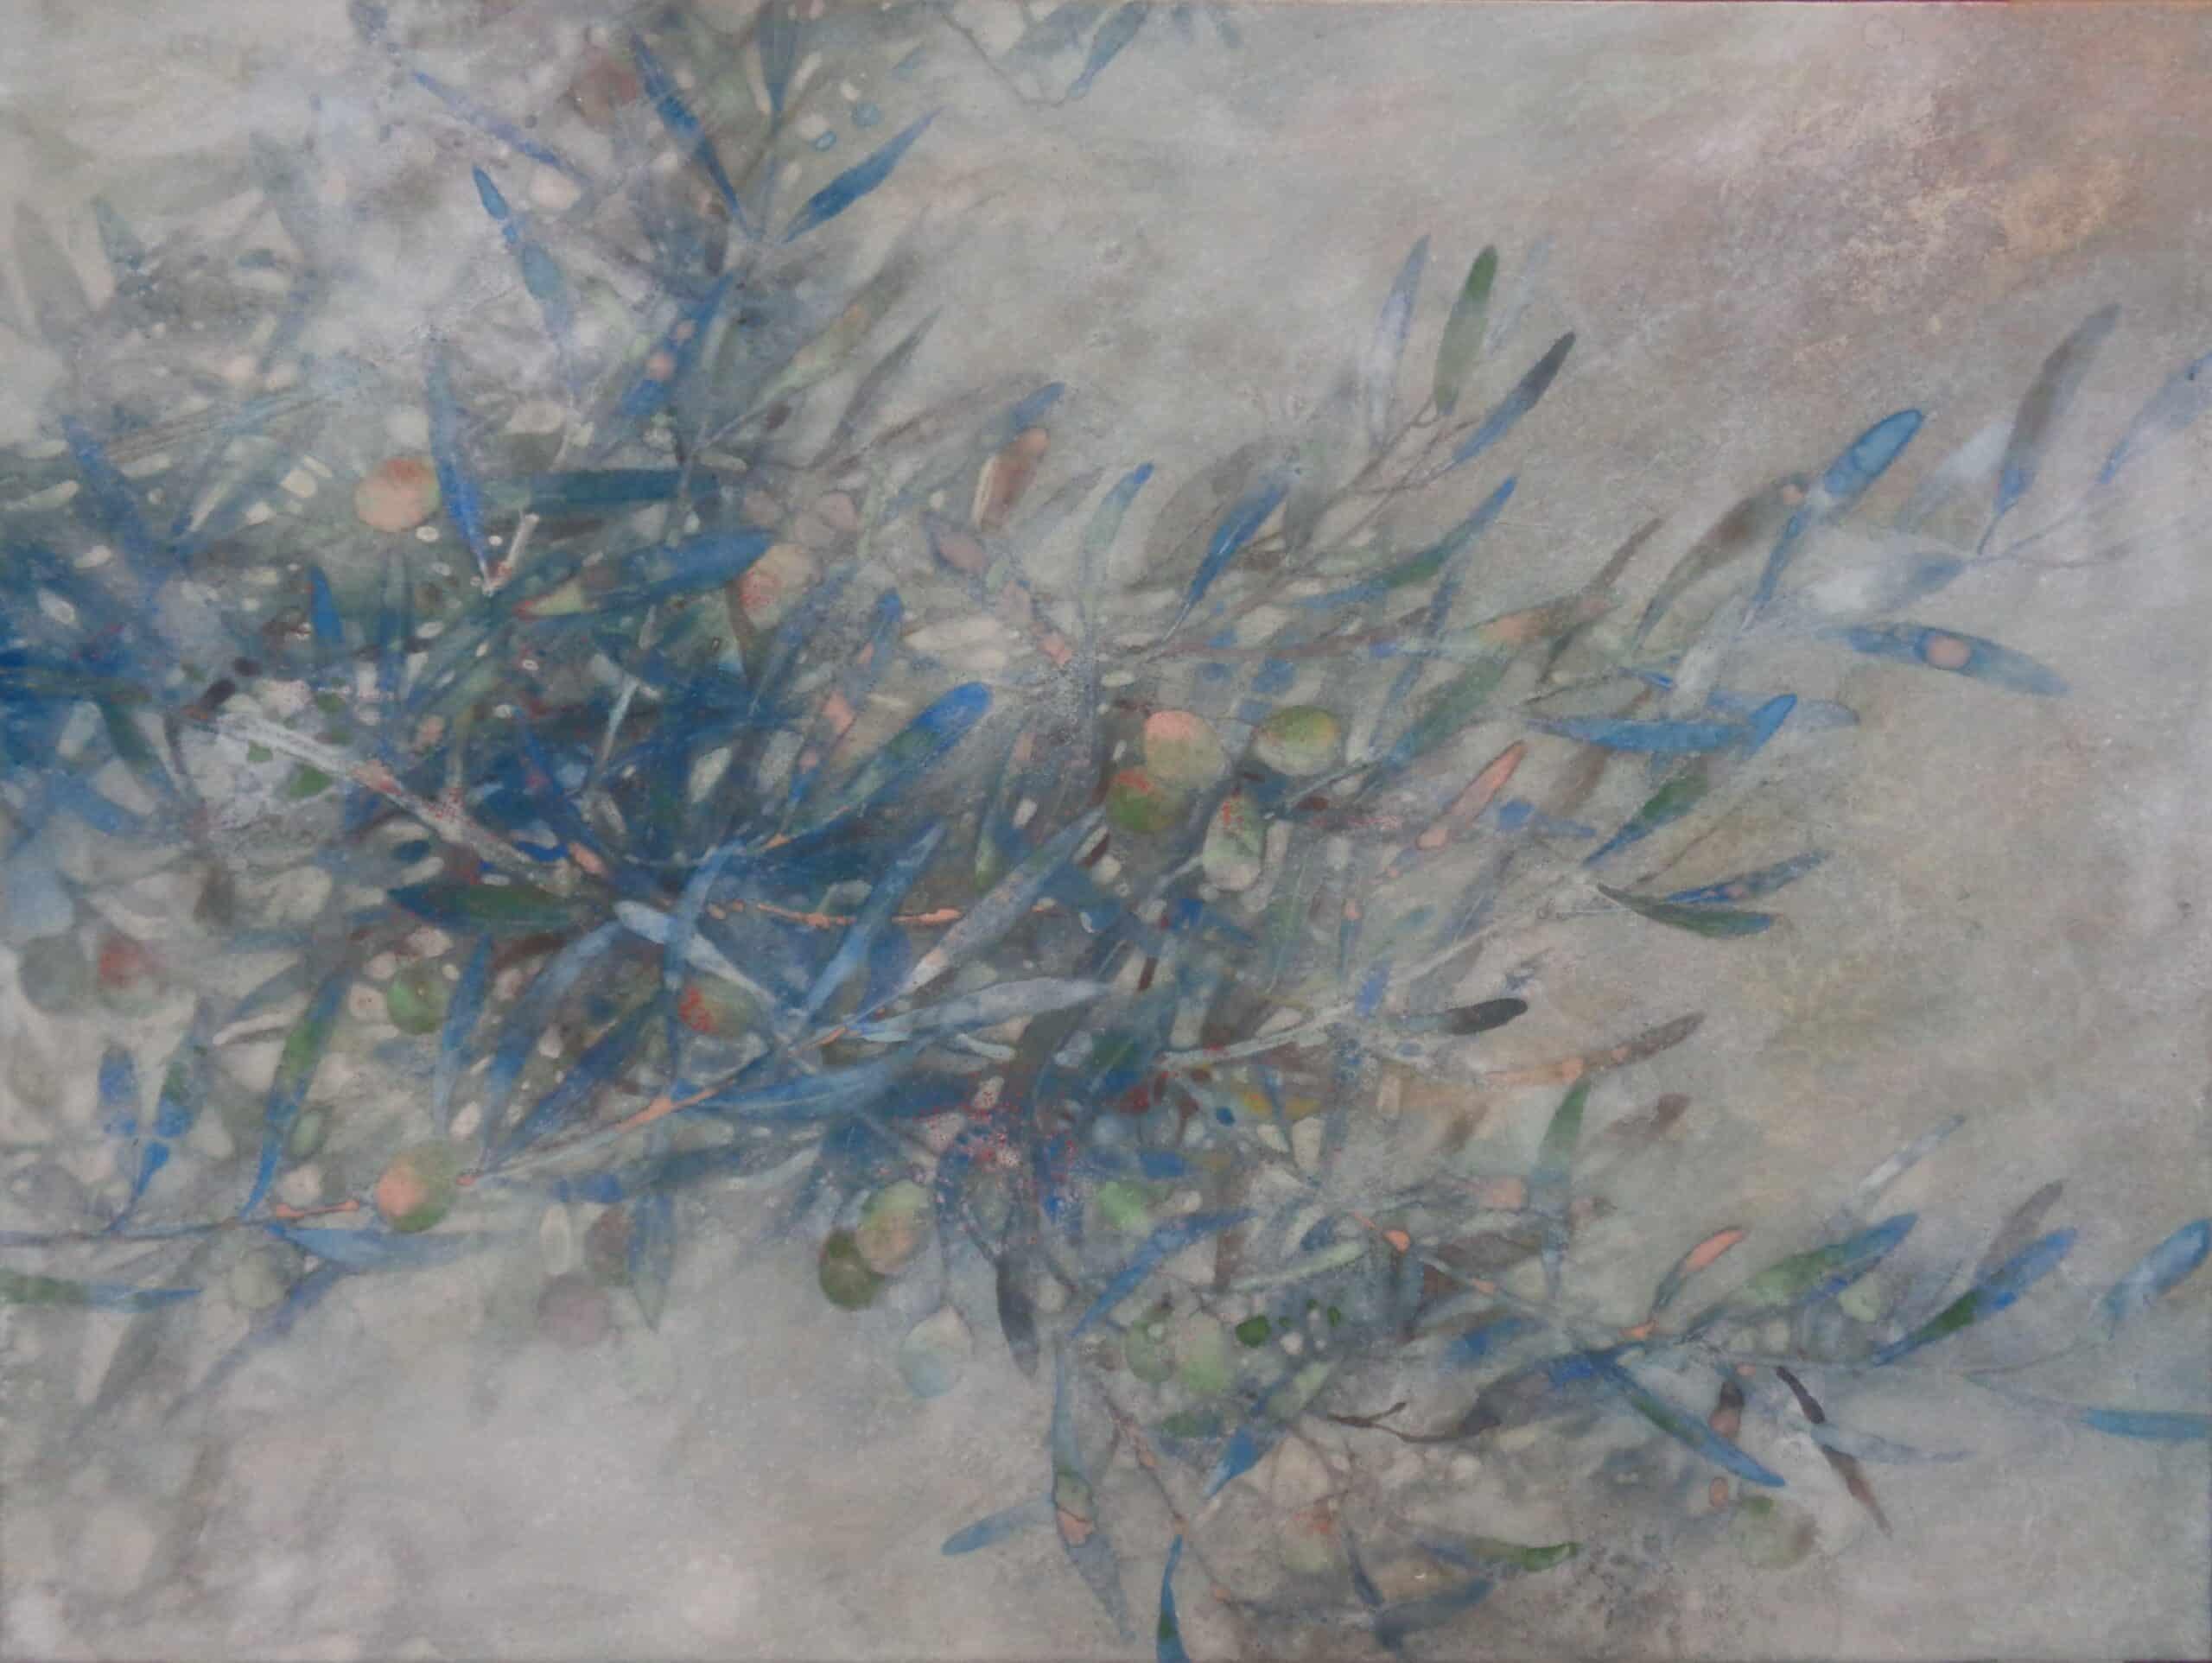 Yiching Chen Figurative Painting - Wind II by Chen Yiching - Contemporary nihonga painting, soft colors, tree